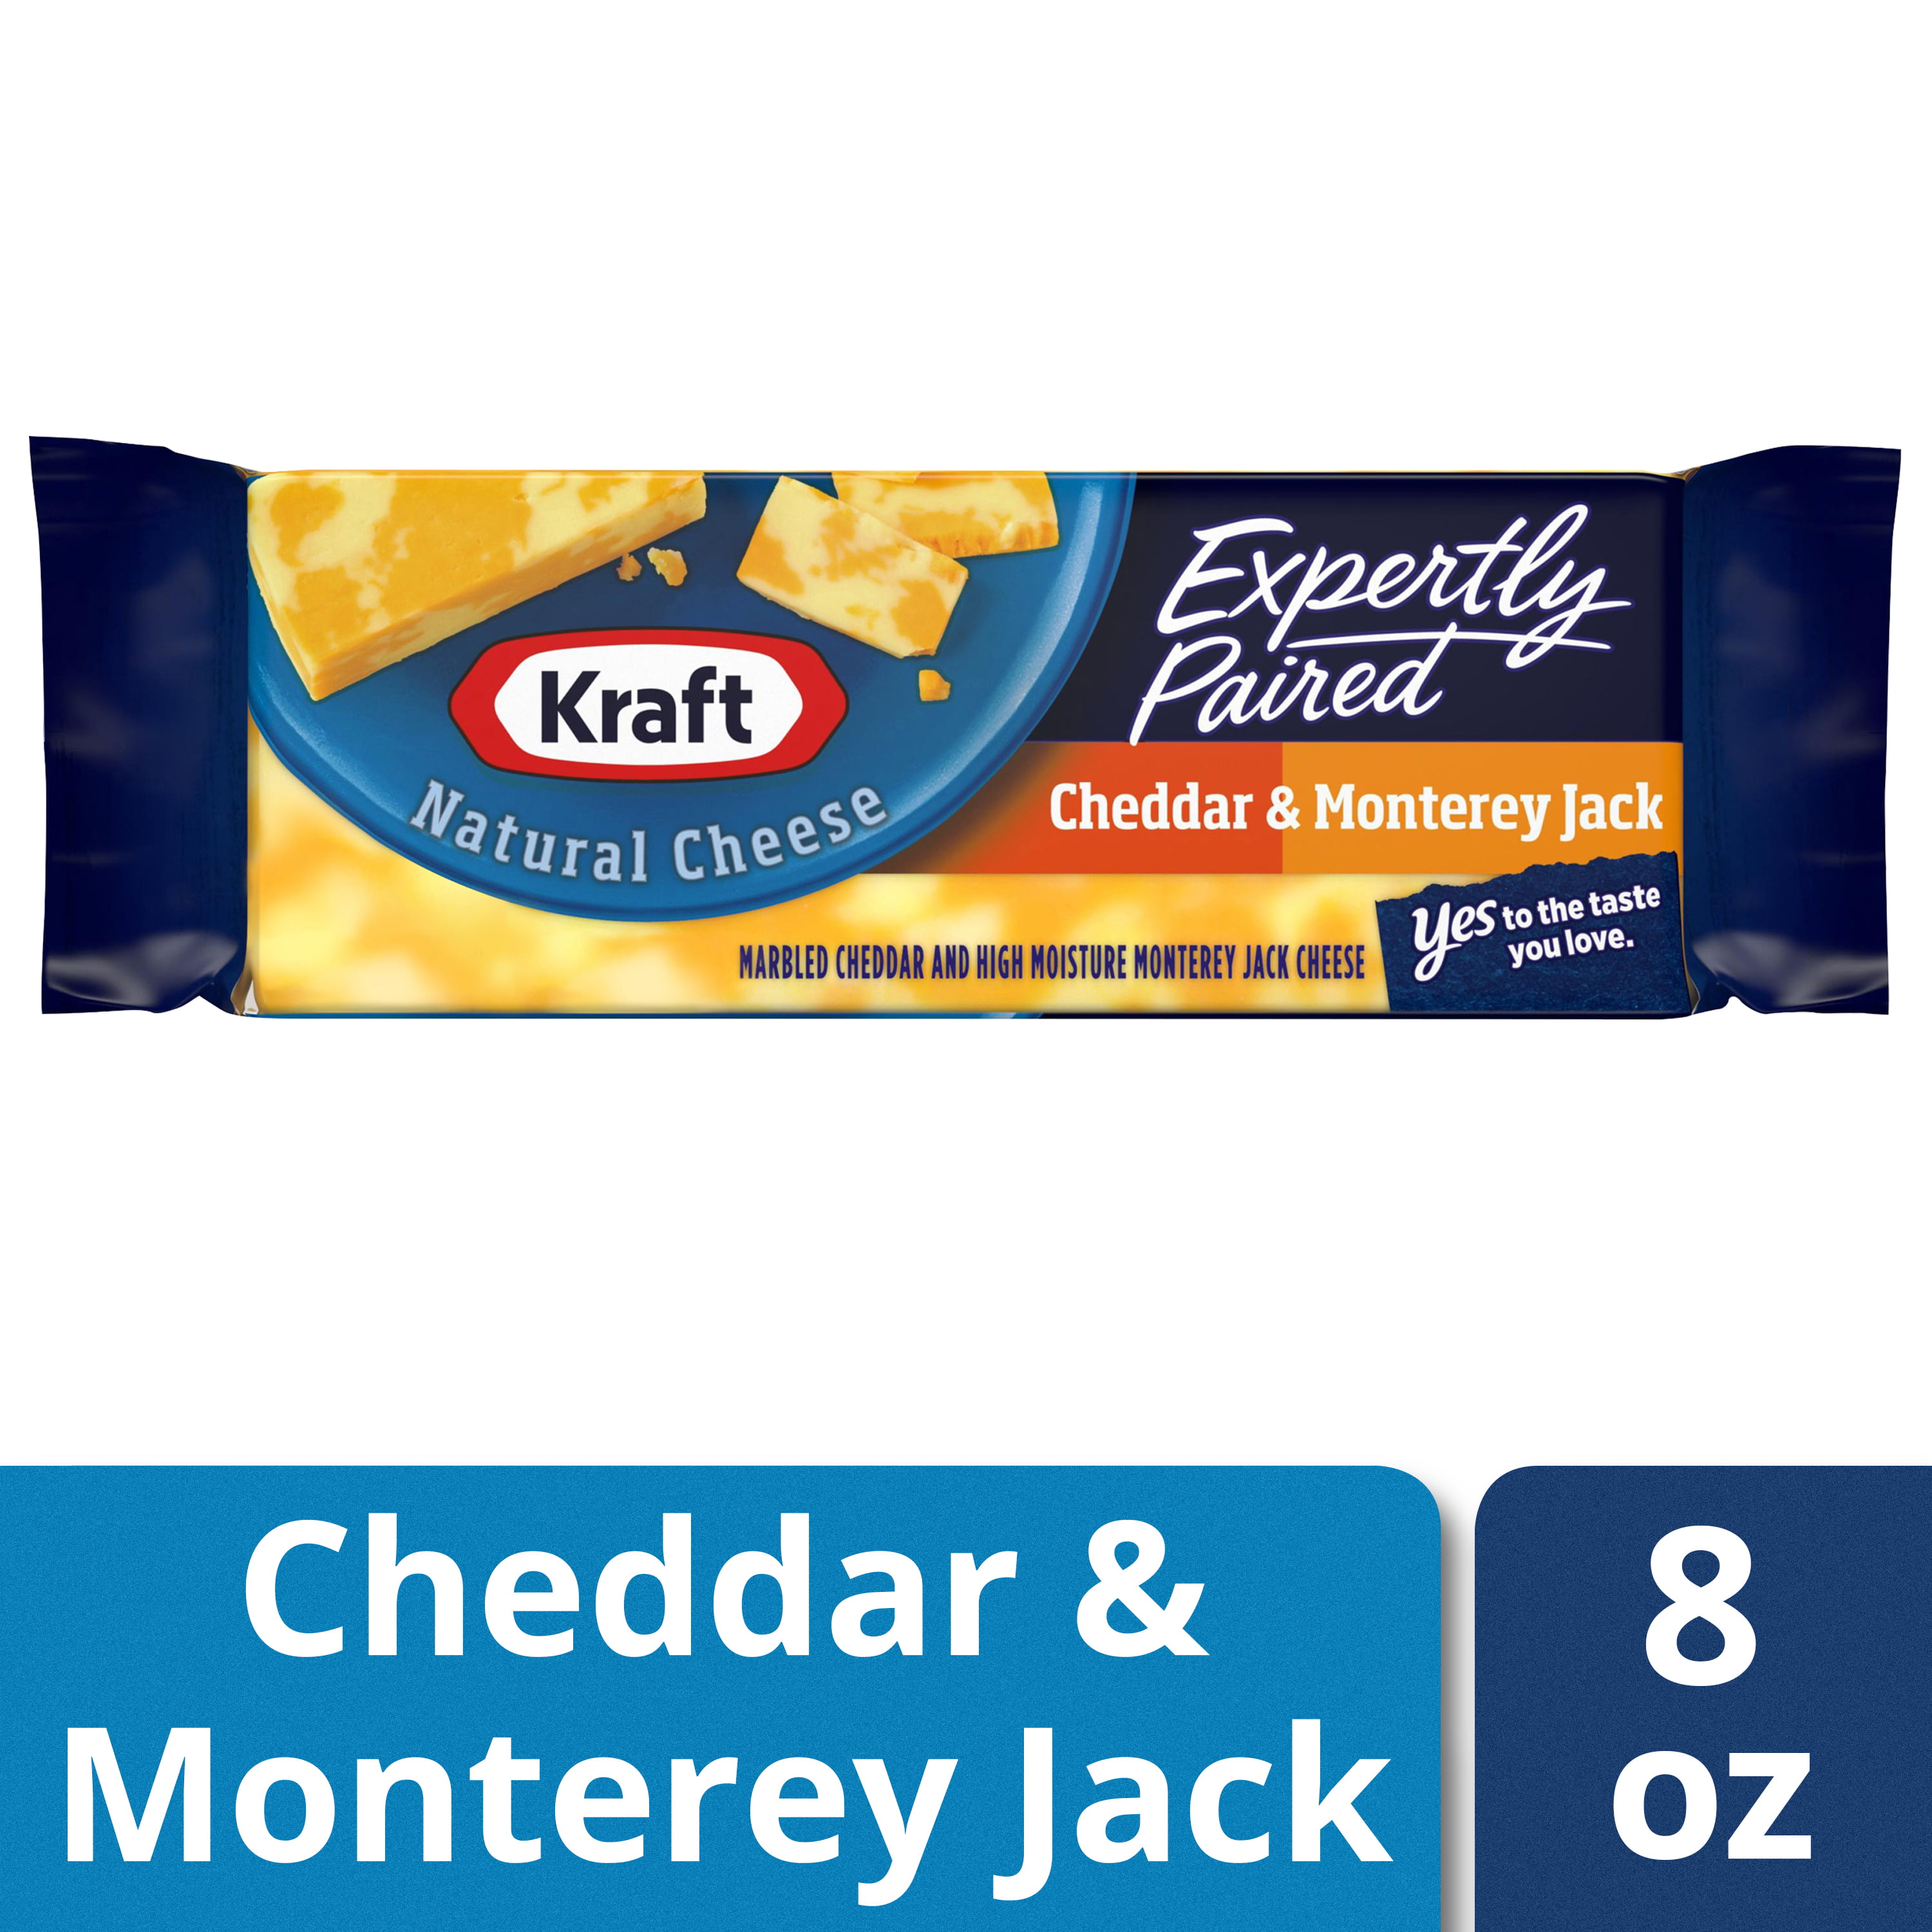 Kraft Expertly Paired Cheddar and Monterey Jack Cheese ...